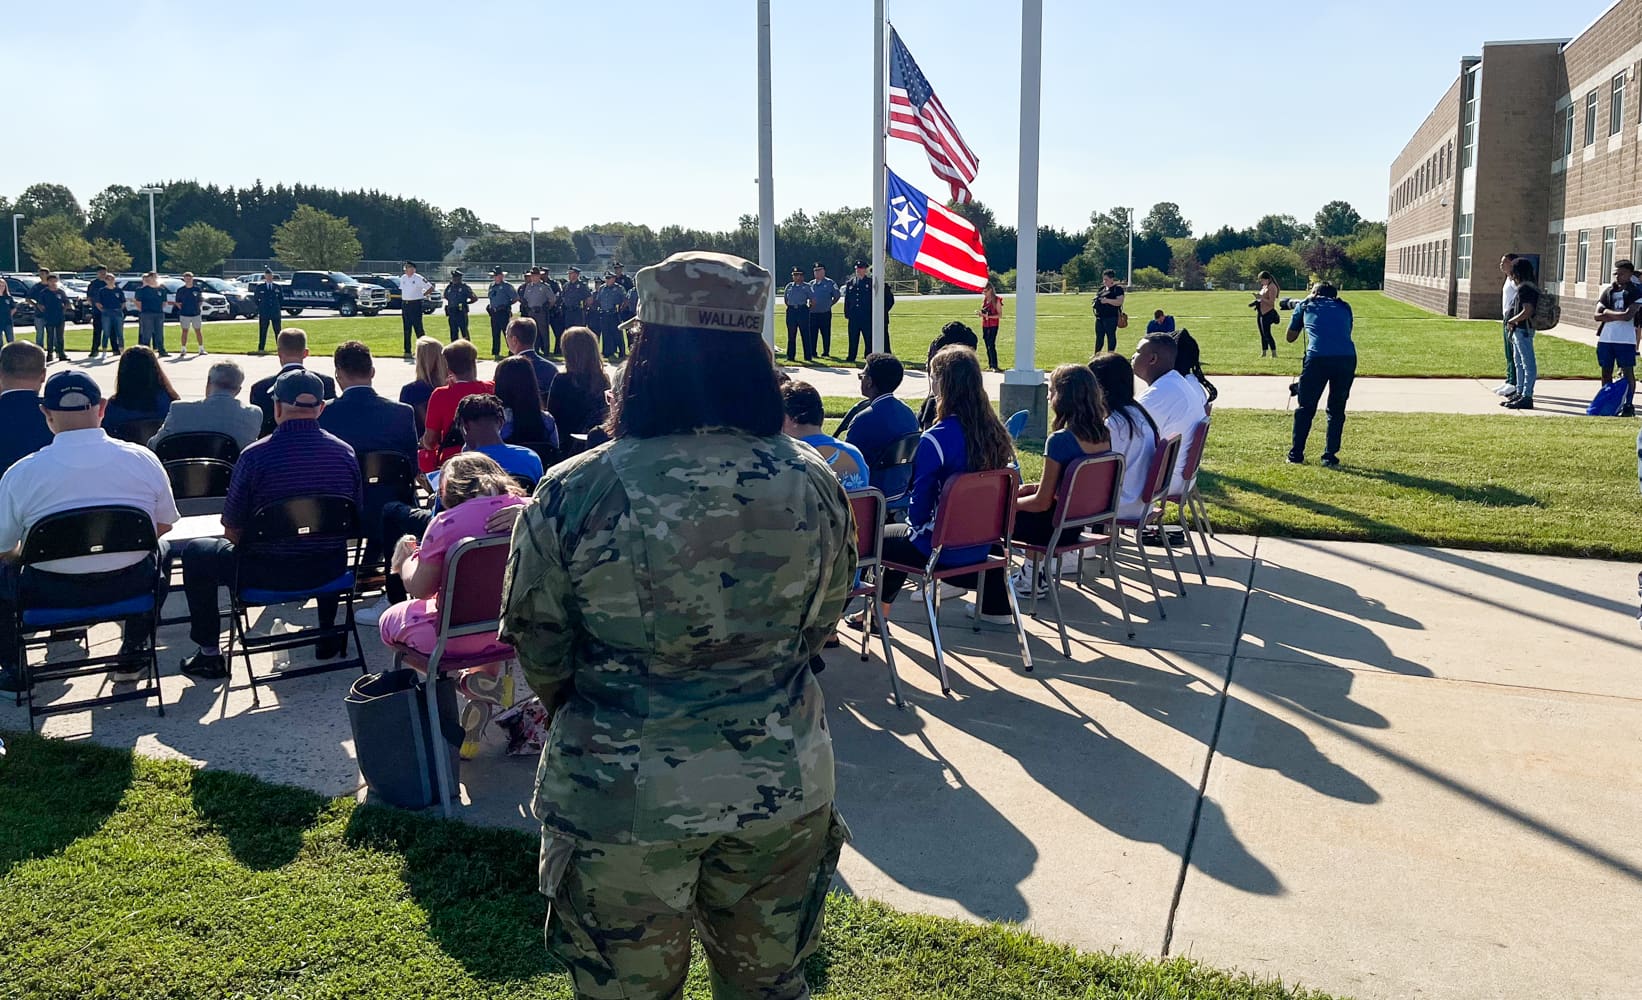 Middletown High School hosted a 9/11 memorial ceremony Friday, where dozens of military and law enforcement officers gathered.